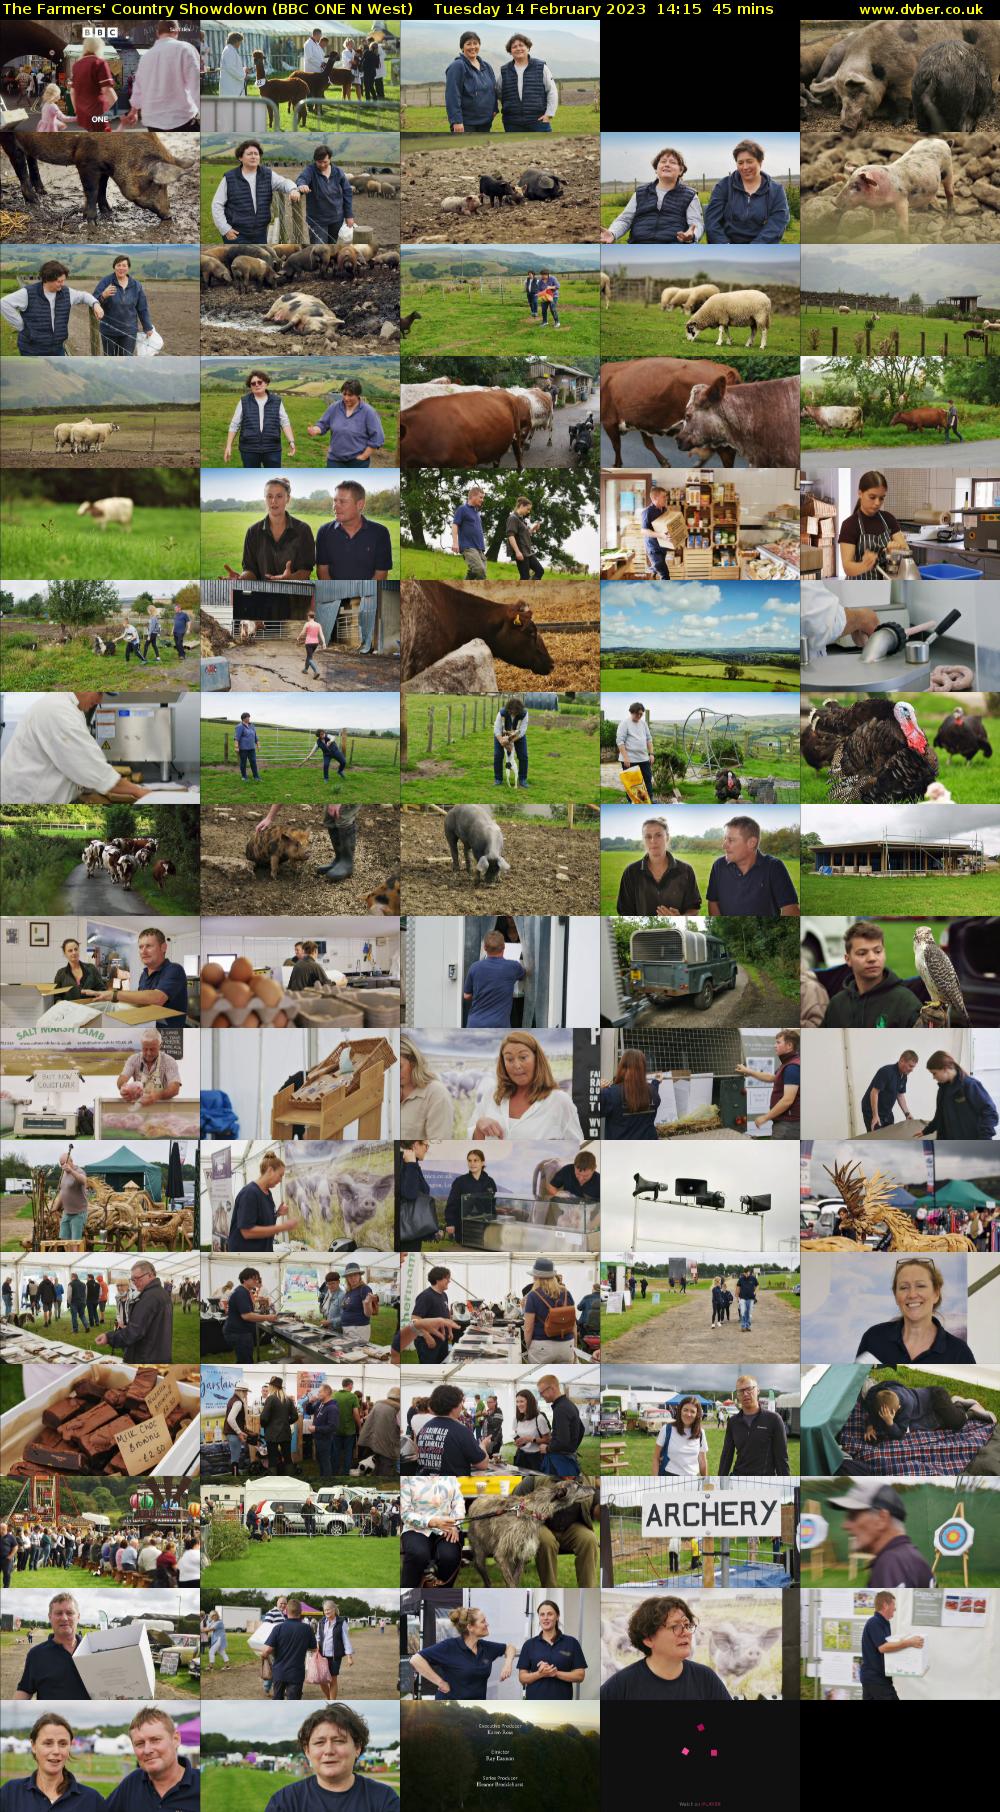 The Farmers' Country Showdown (BBC ONE N West) Tuesday 14 February 2023 14:15 - 15:00